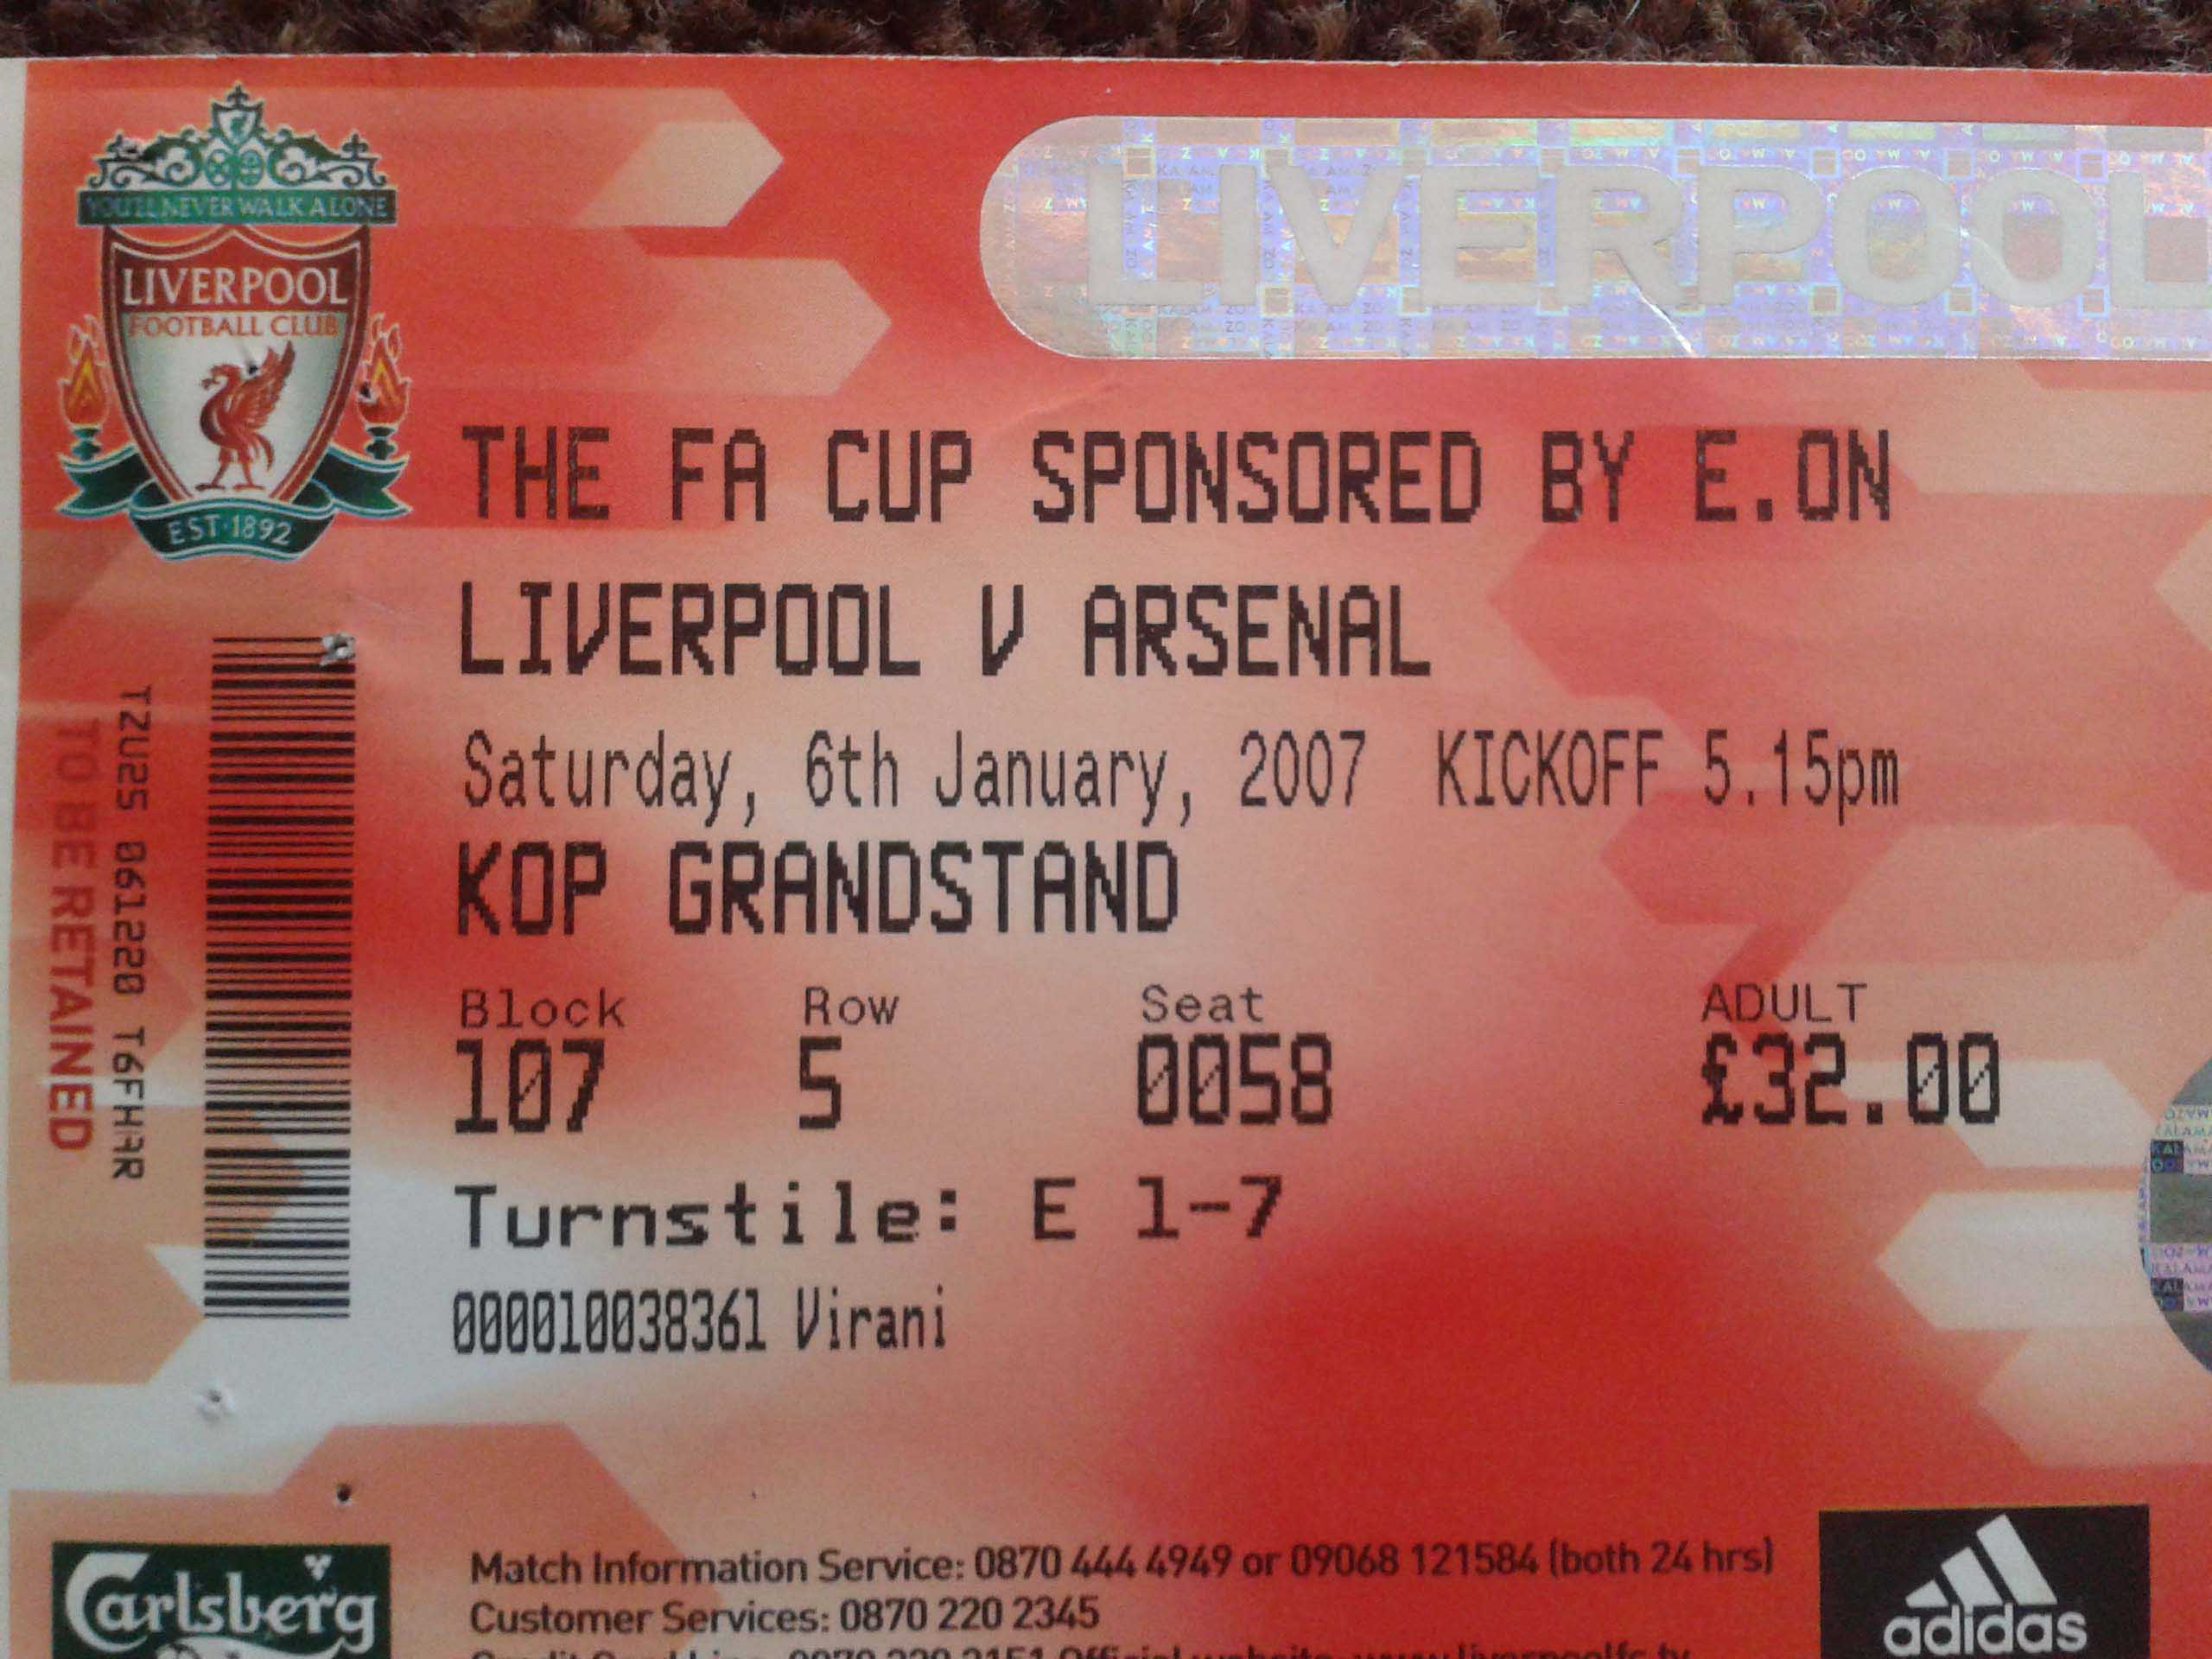 JUST THE TICKET: FIVE FAVOURITE LIVERPOOL STUBS #2 - The Anfield Wrap